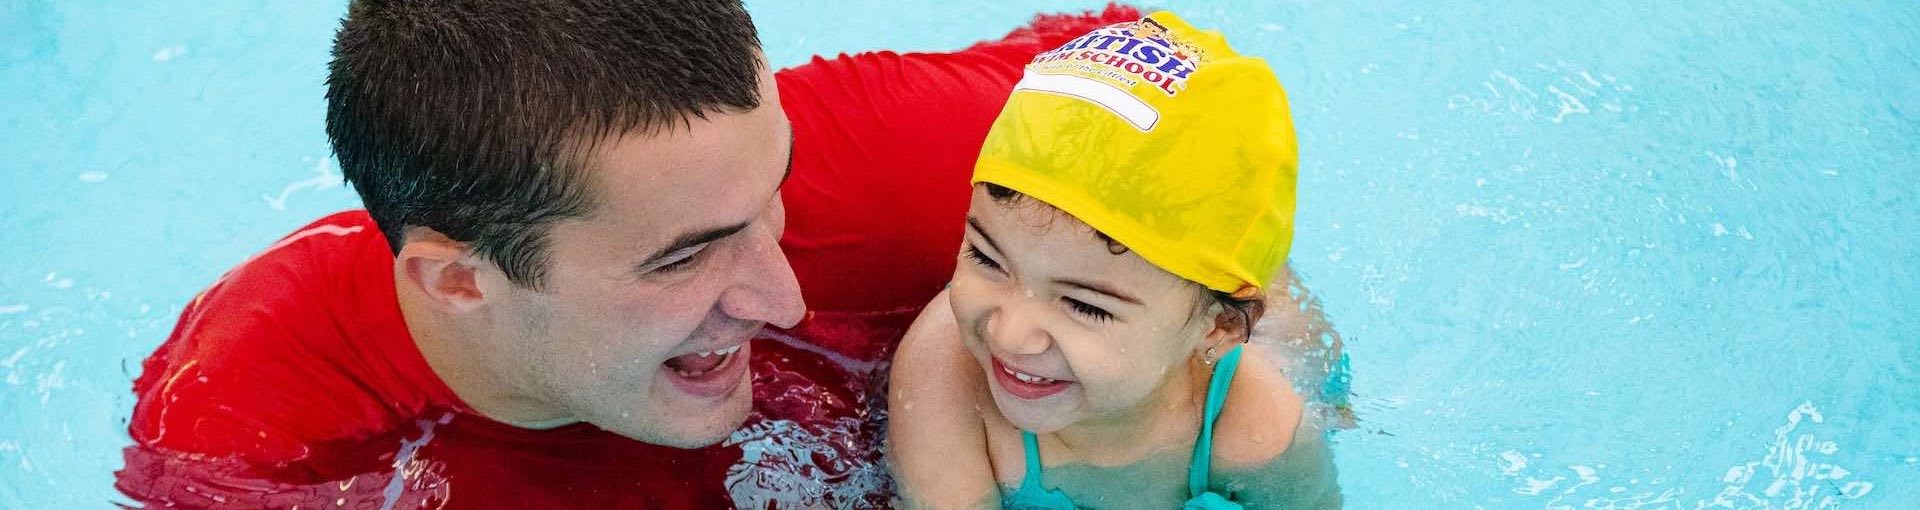 Swim instructor with child in swimming pool